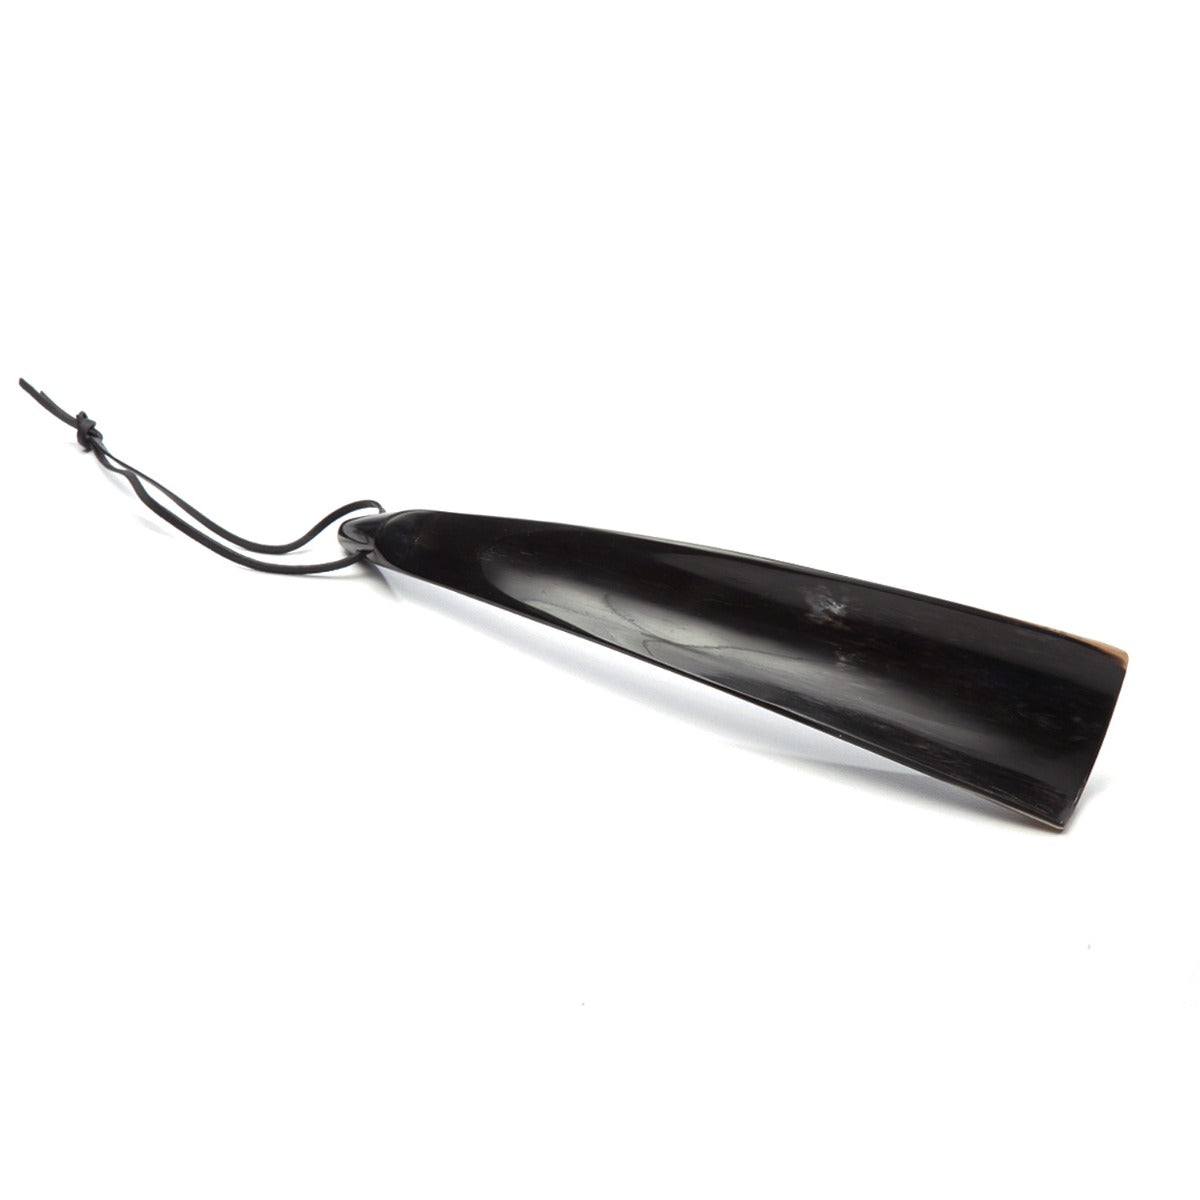 A black horn with a black handle on a white background, Mortimer Shoehorn from KirbyAllison.com.